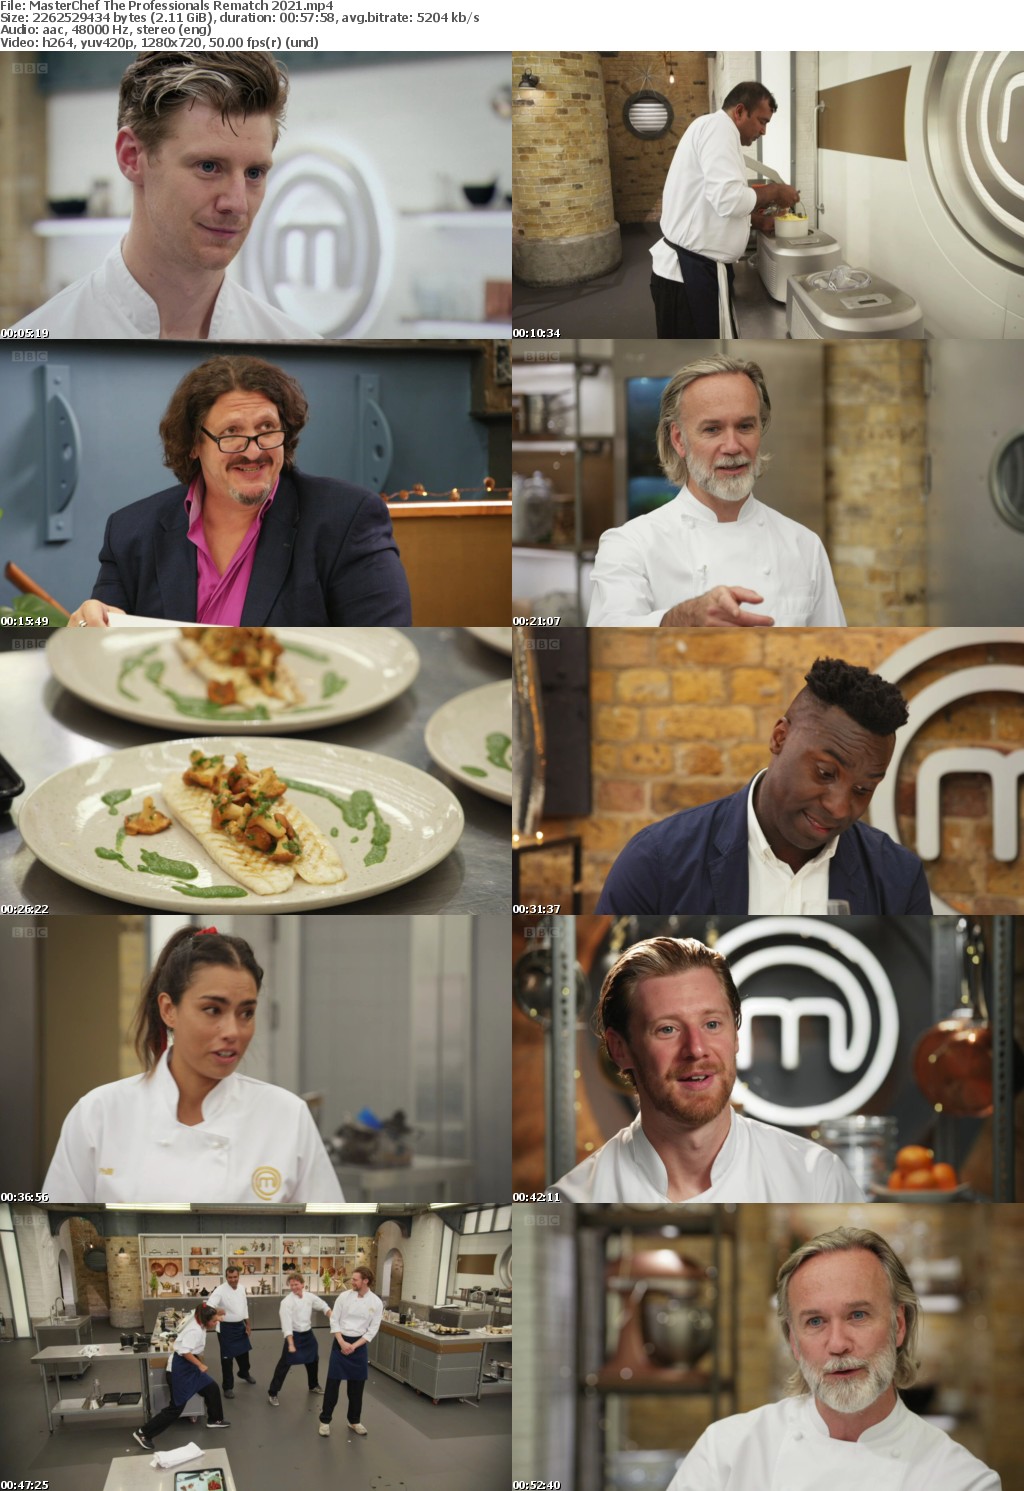 MasterChef The Professionals Rematch 2021 (1280x720p HD, 50fps, soft Eng subs)